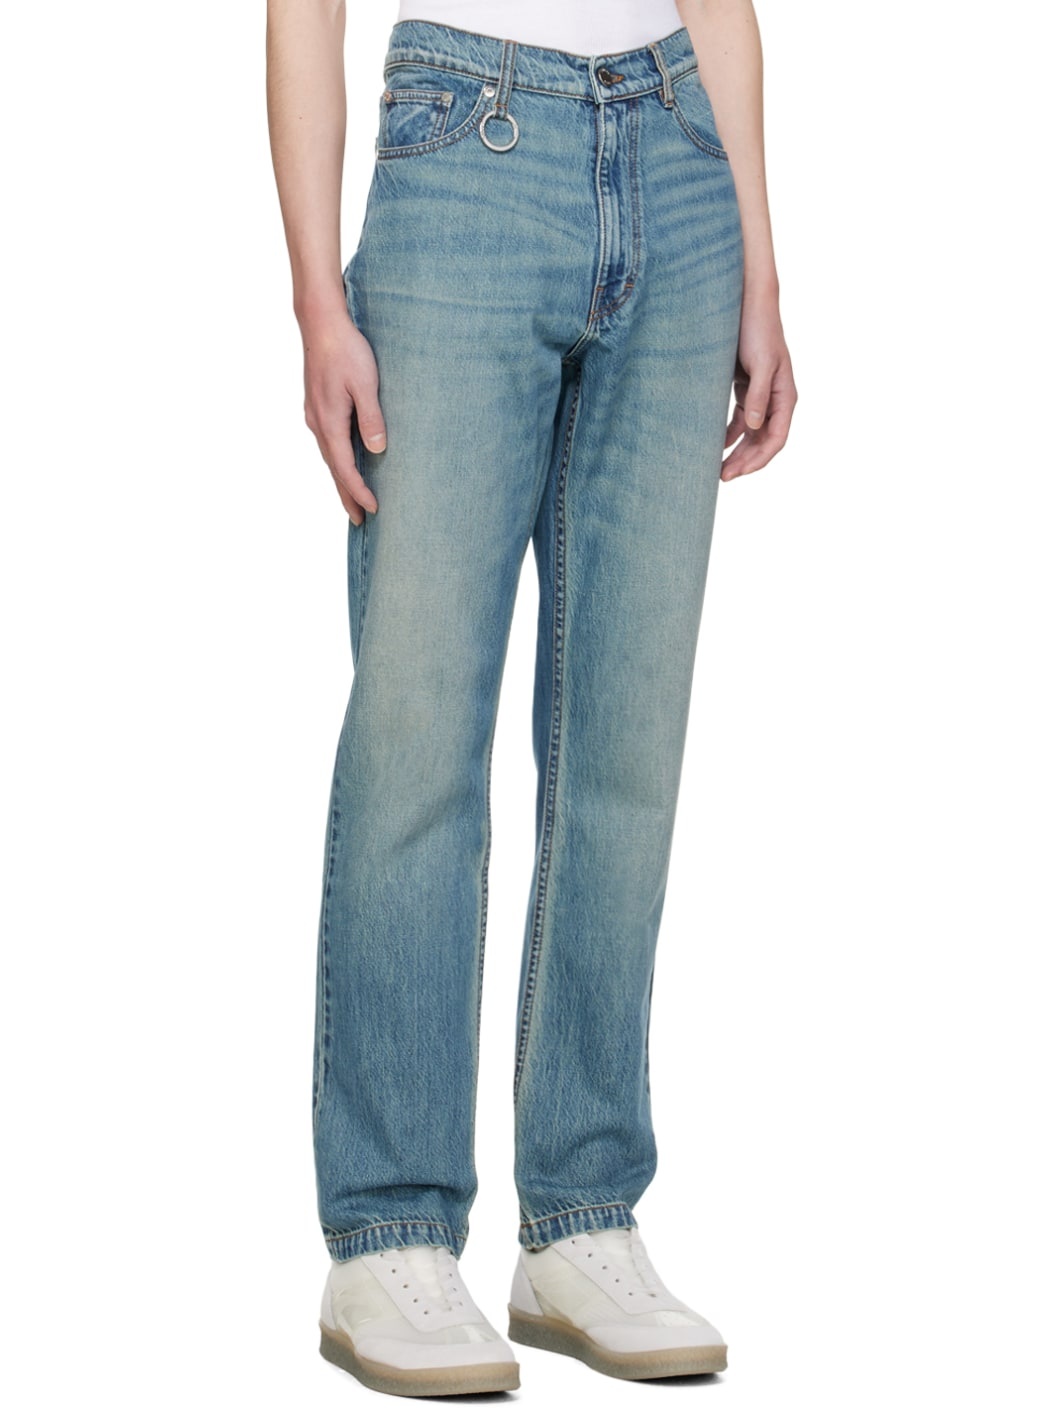 Blue Relic Jeans - 2